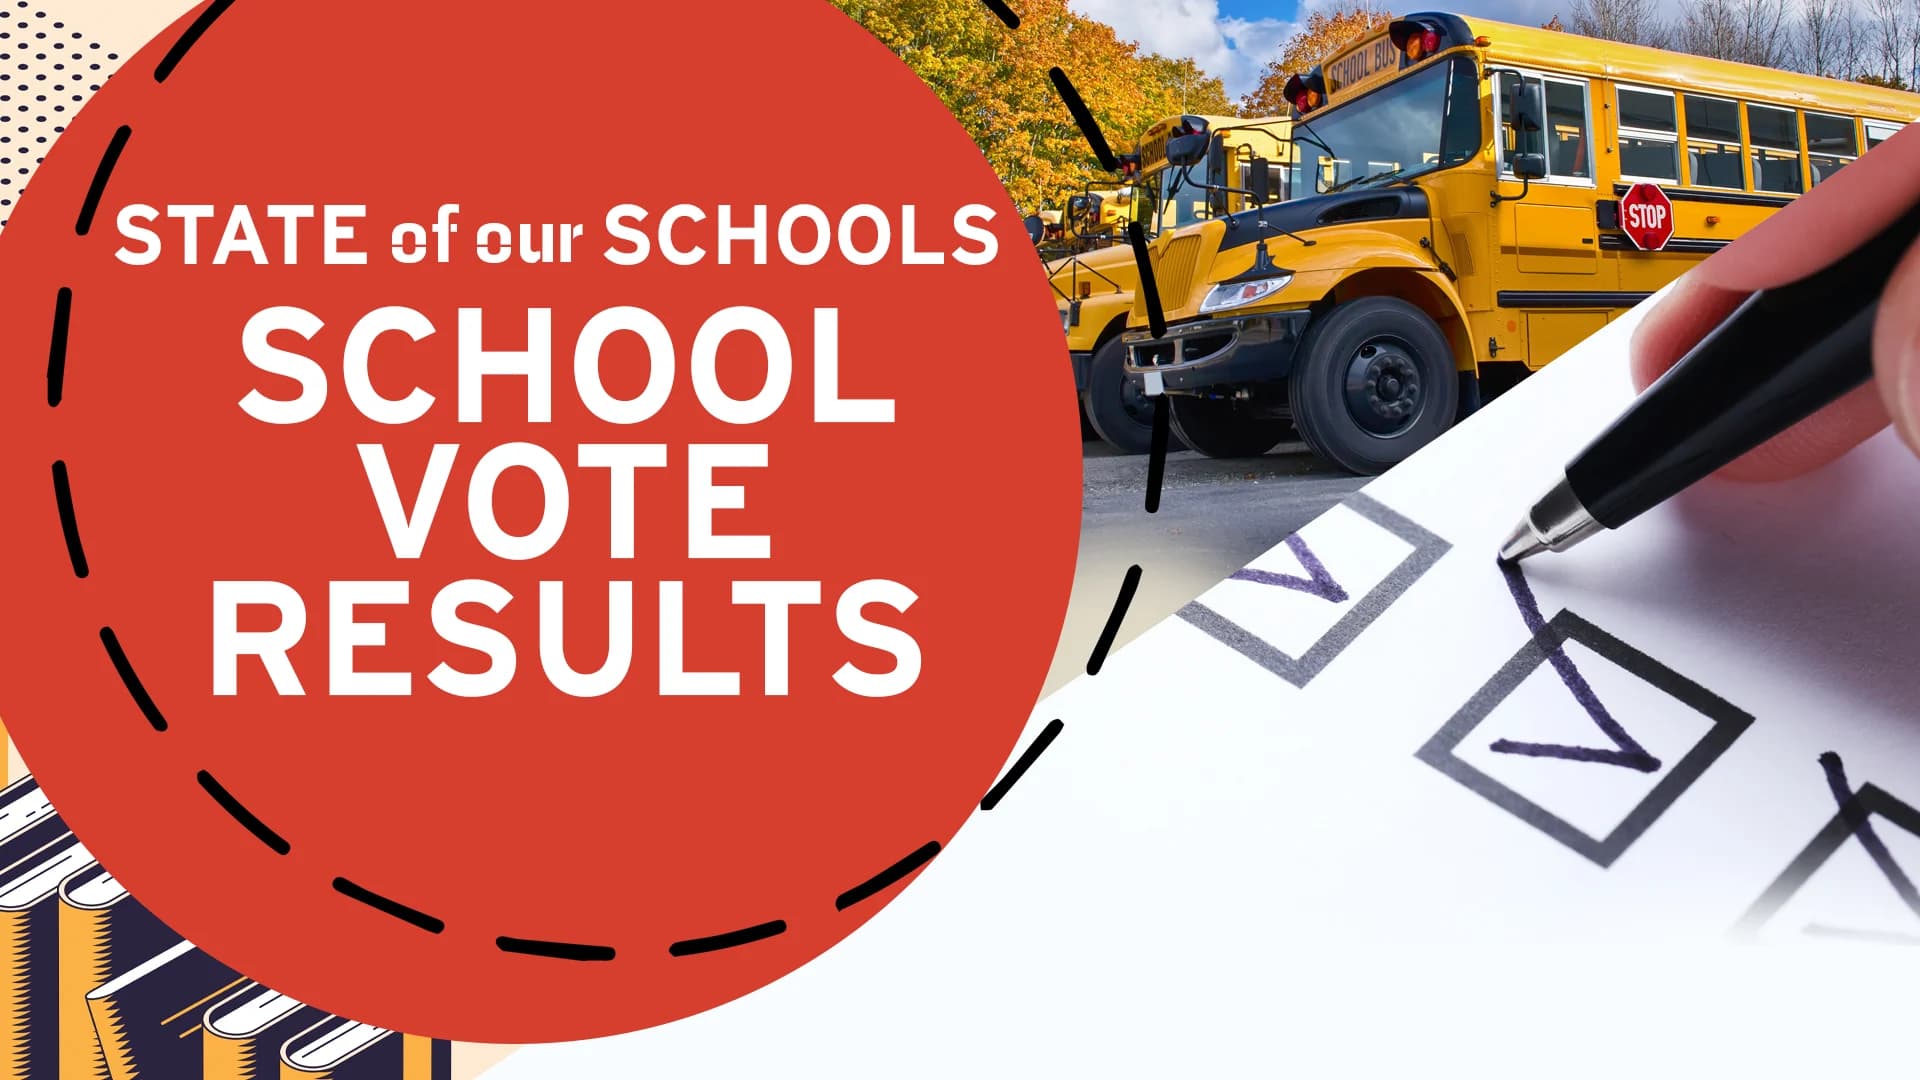 RESULTS: Long Island School Vote 2021 Results